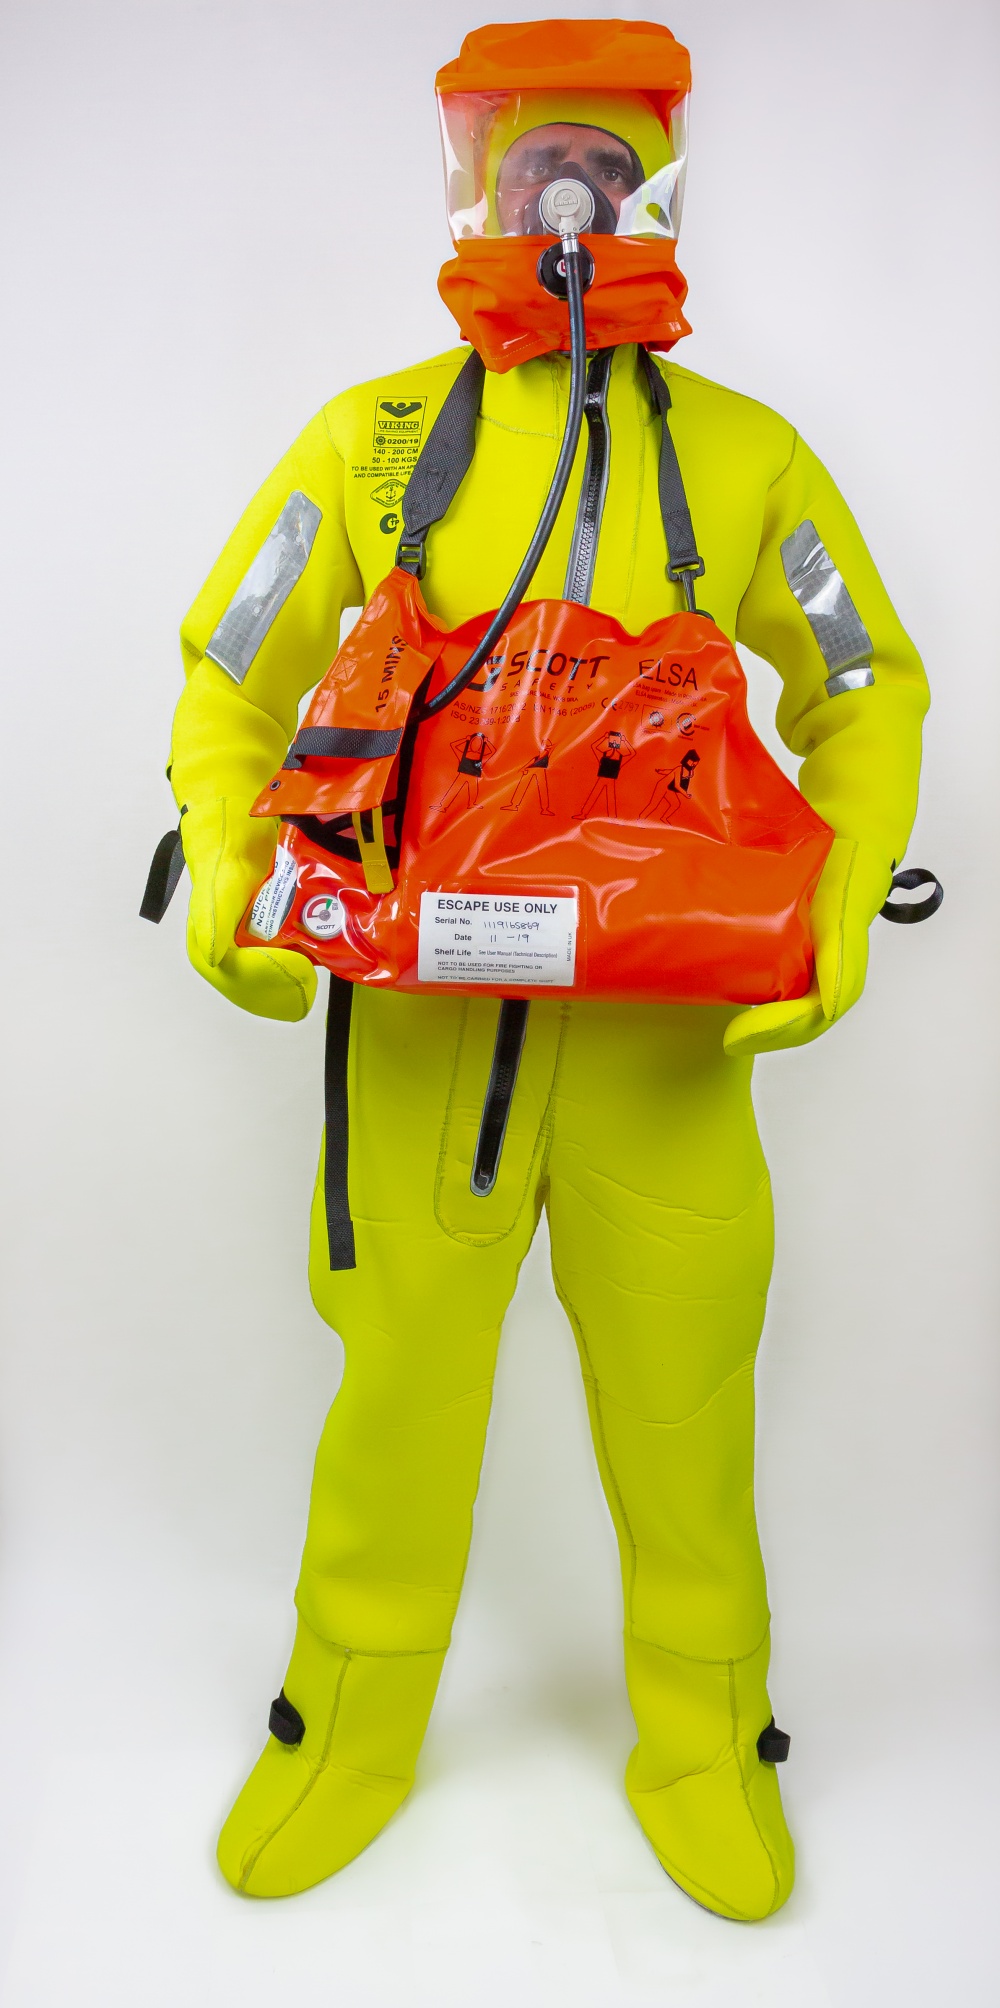 Maintanance and check of EEBD’s (Emergency Escape Breathing Devices) photo :: Marko Ltd